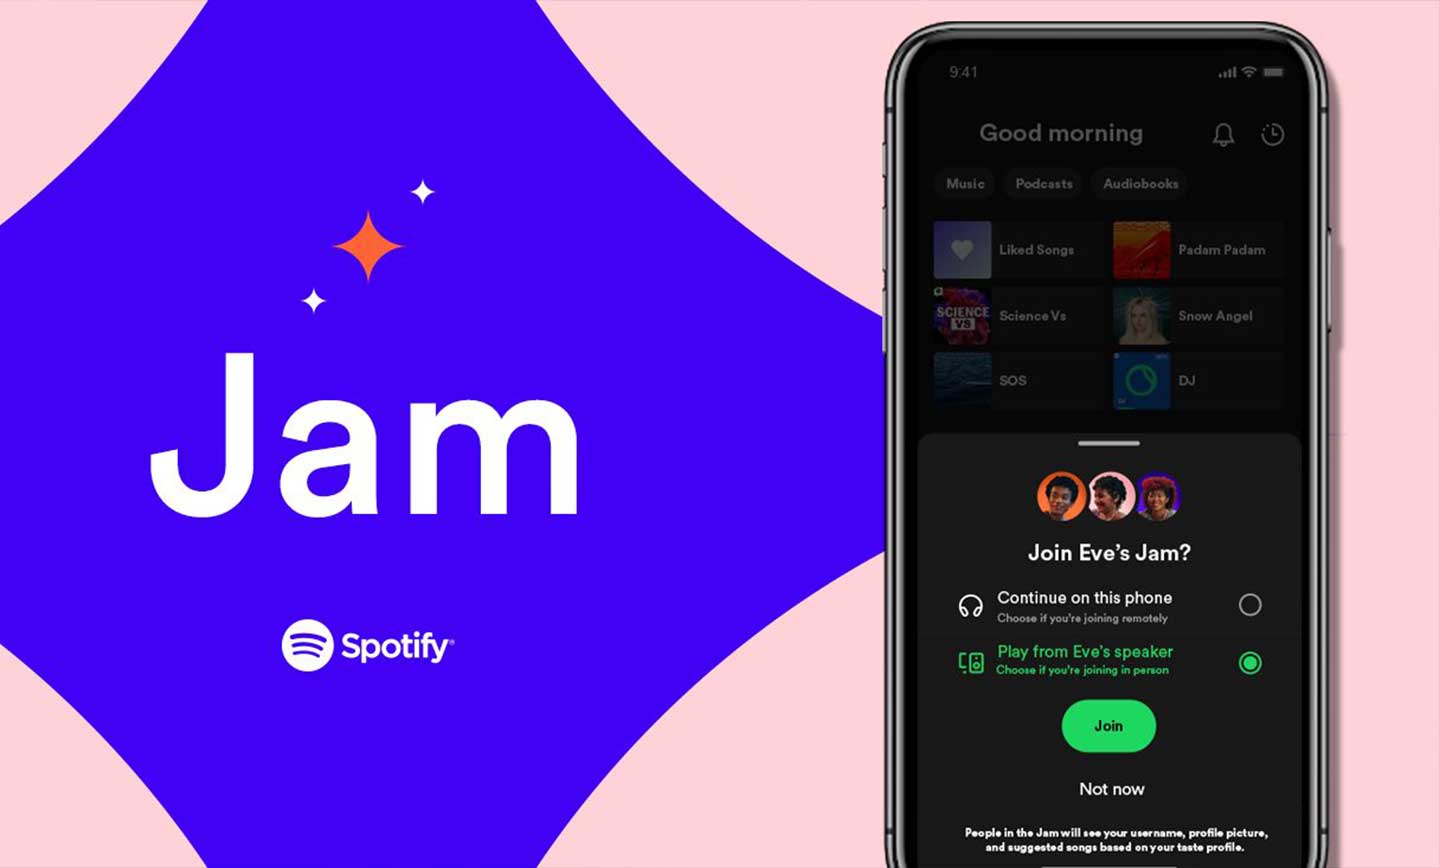 Spotify's new Jam feature lets you listen to a playlist with your friends